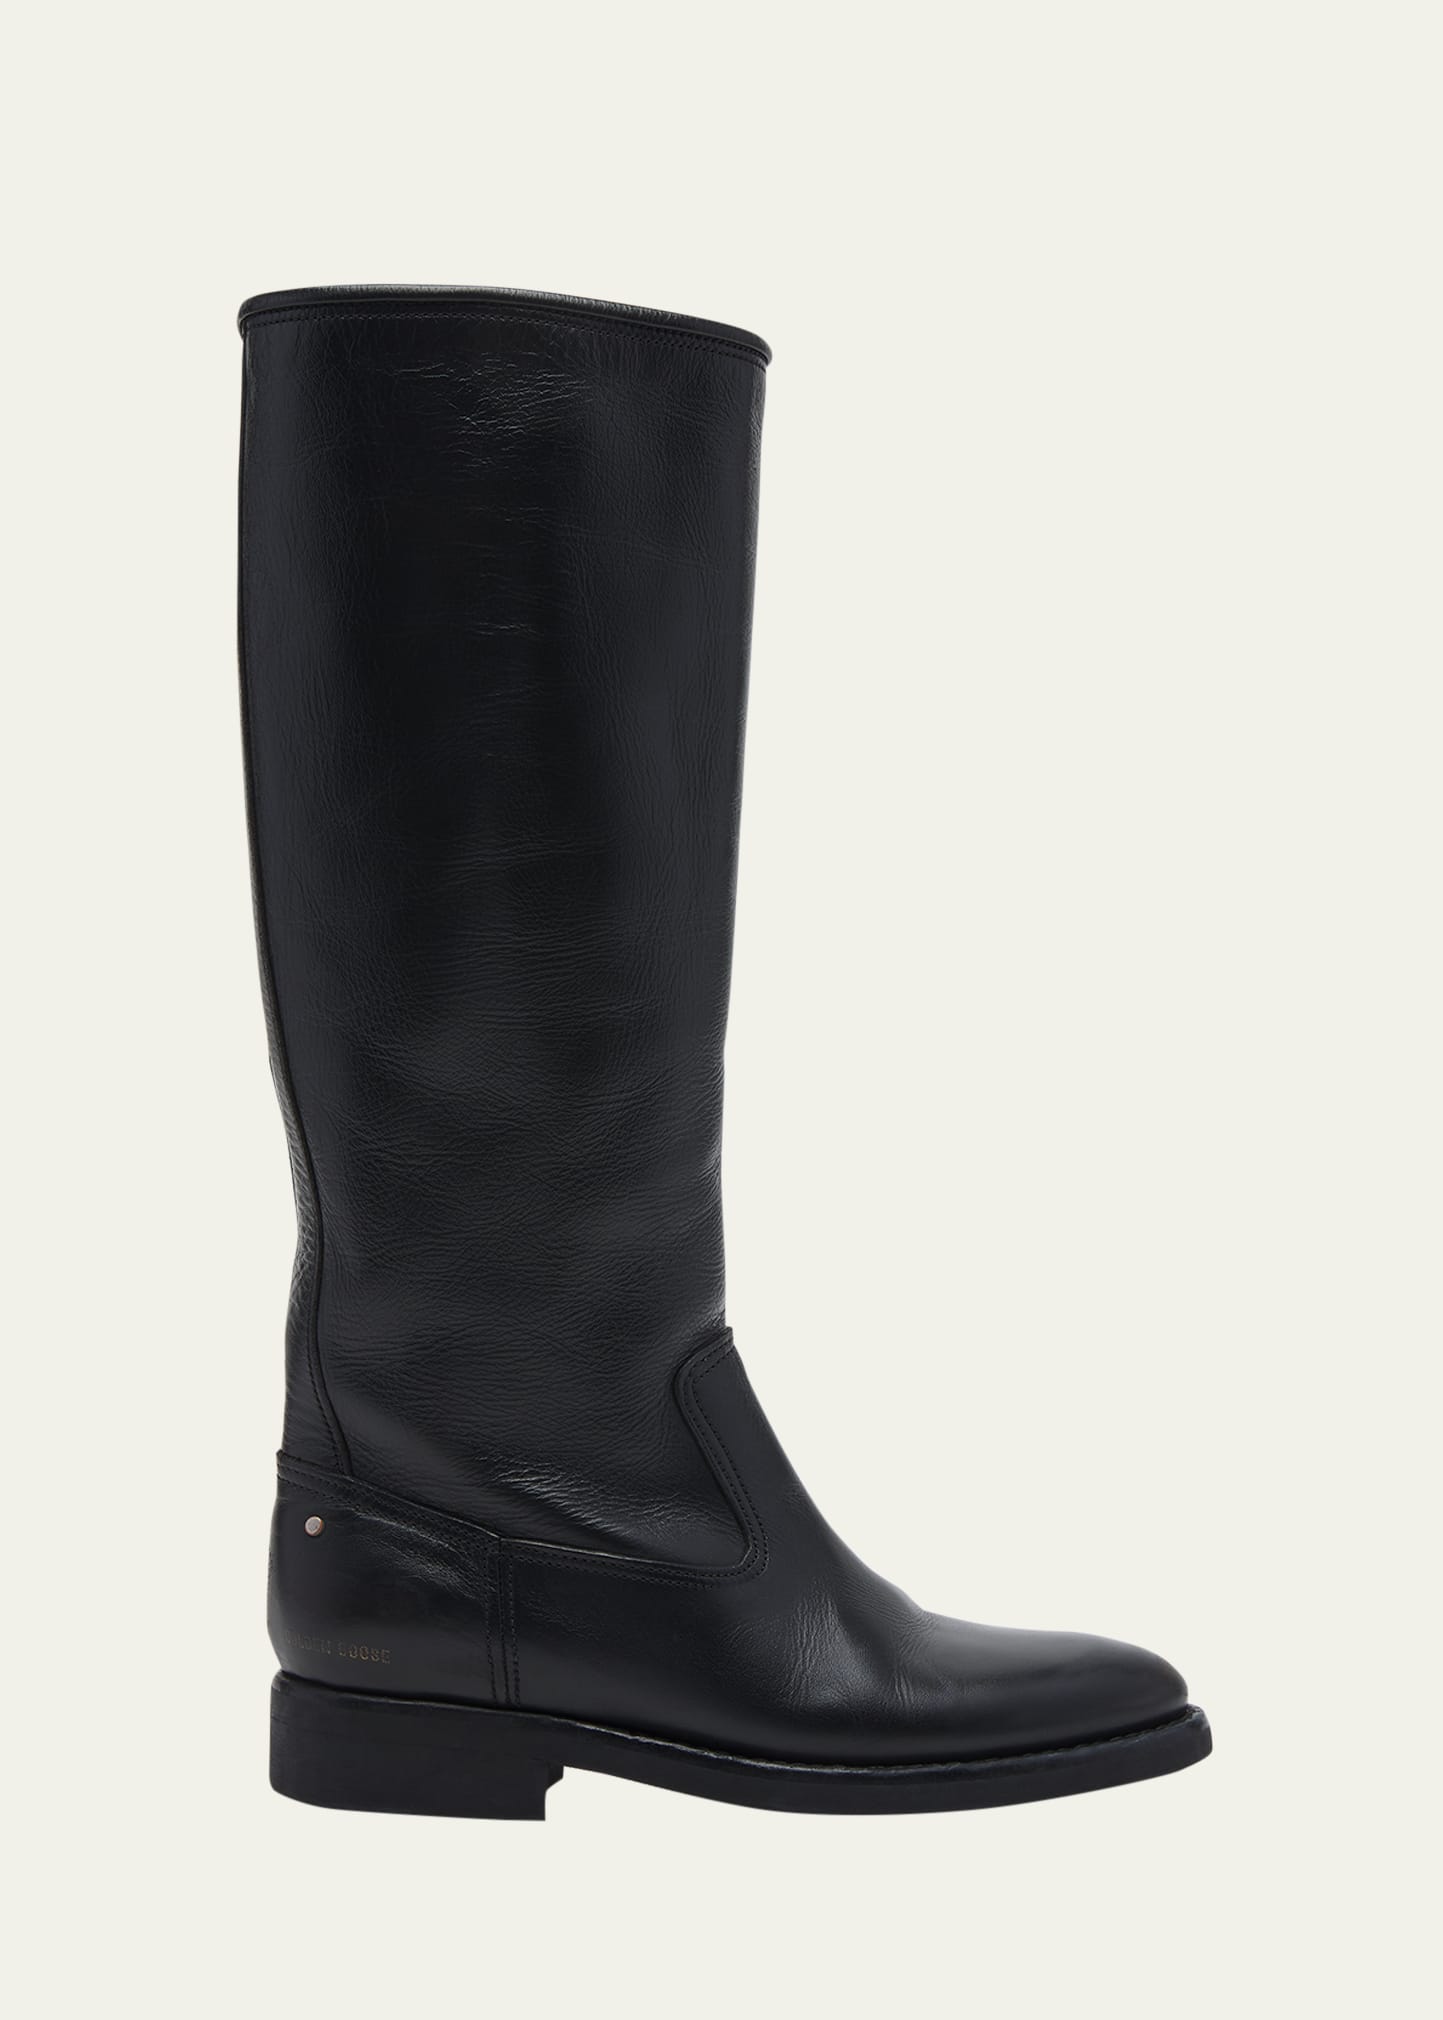 Golden Goose Leather Tall Biker Moto Boots In Black